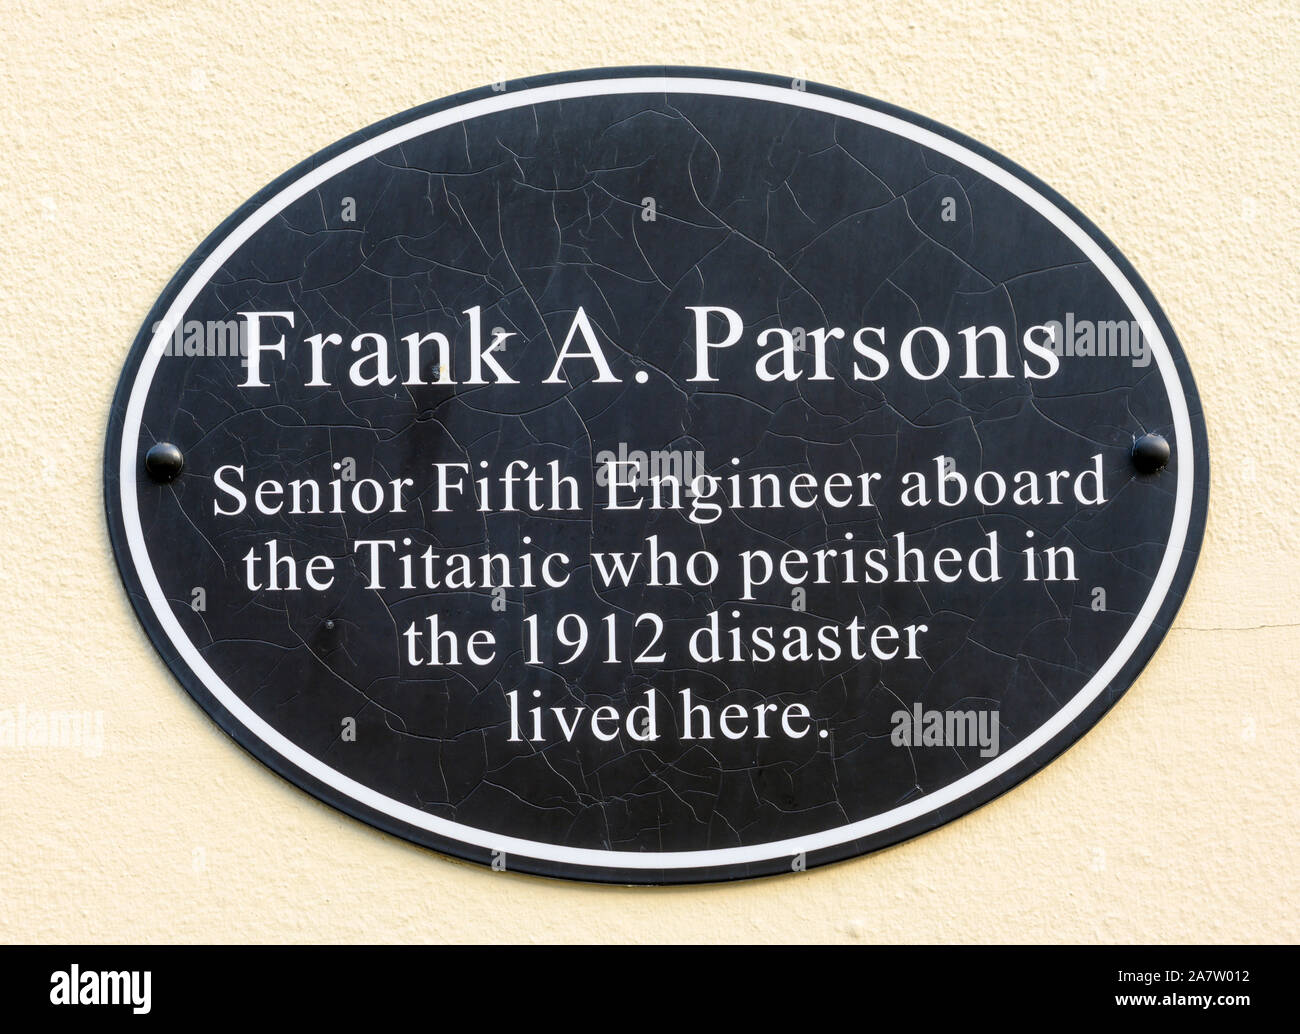 Heritage plaque at 38 Bugle Street, Southampton, Hampshire, England, UK where Frank Alfred Parsons - Senior Fifth Engineer aboard Titanic lived. Stock Photo